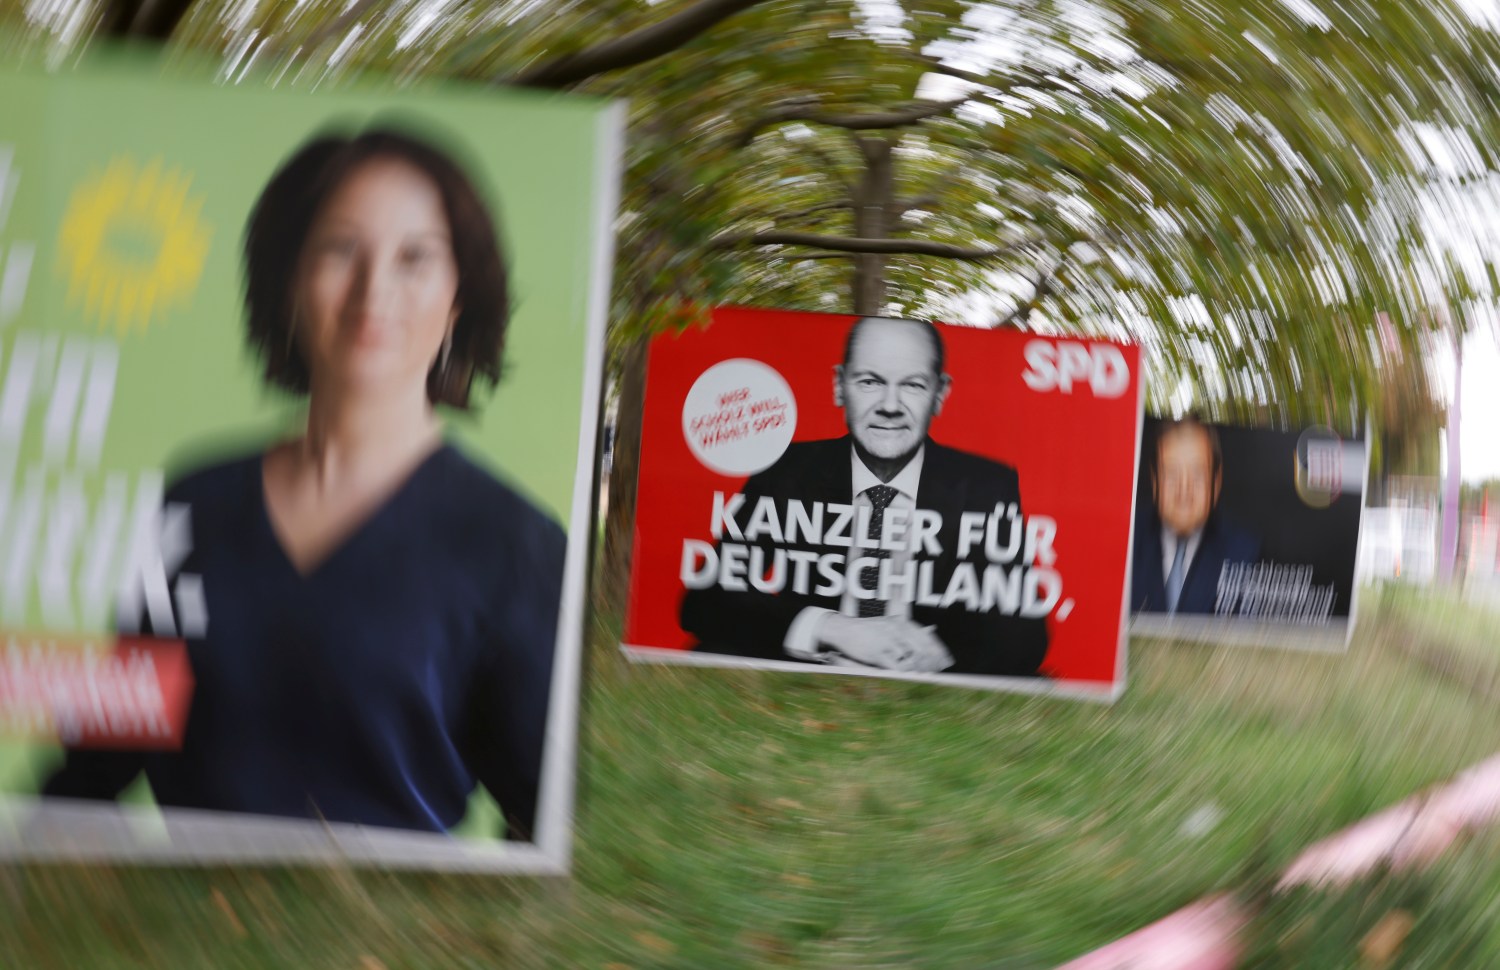 Election posters of Germany's top candidates for chancellor—Annalena Baerbock, co-leader of Germany's Green party, Olaf Scholz, of the Social Democratic Party, and Armin Laschet of the Christian Democratic Union leader—are displayed in Berlin.